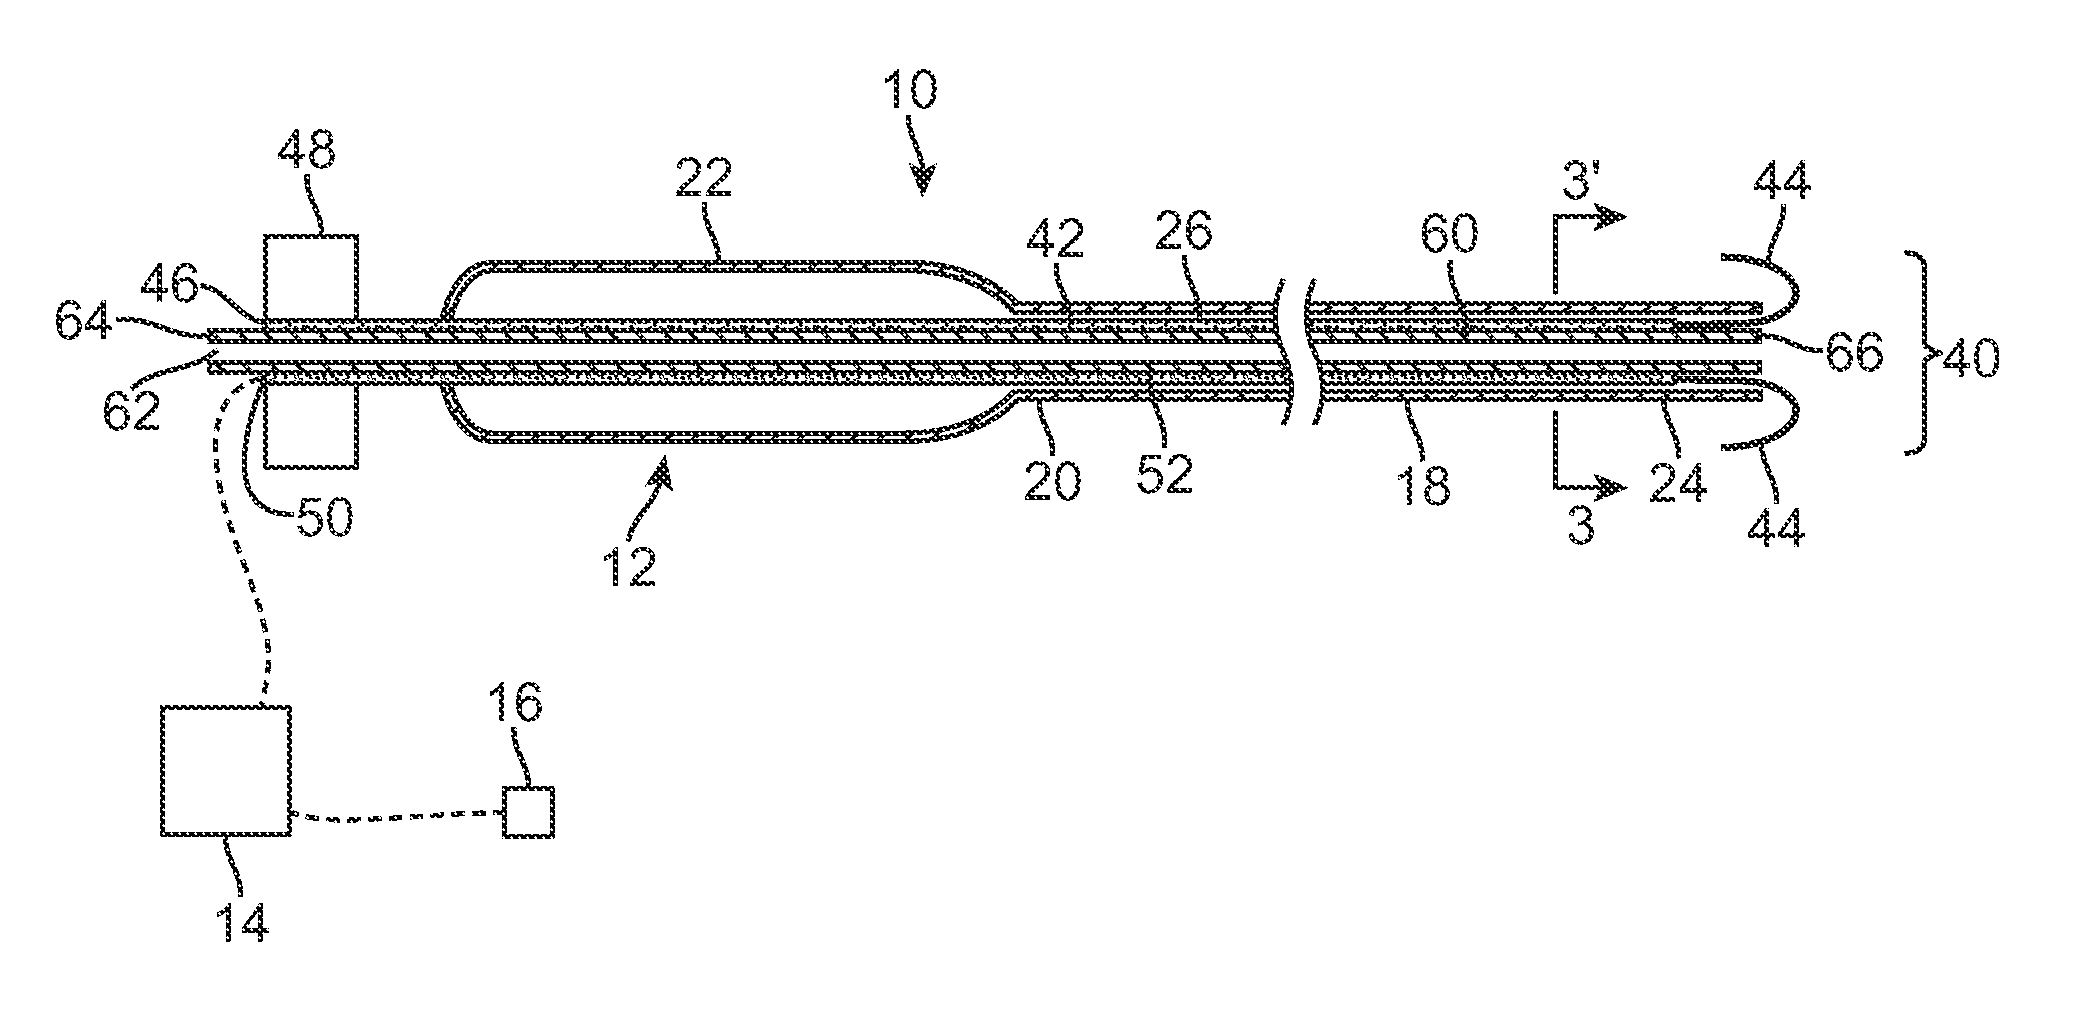 Radiofrequency ablation device